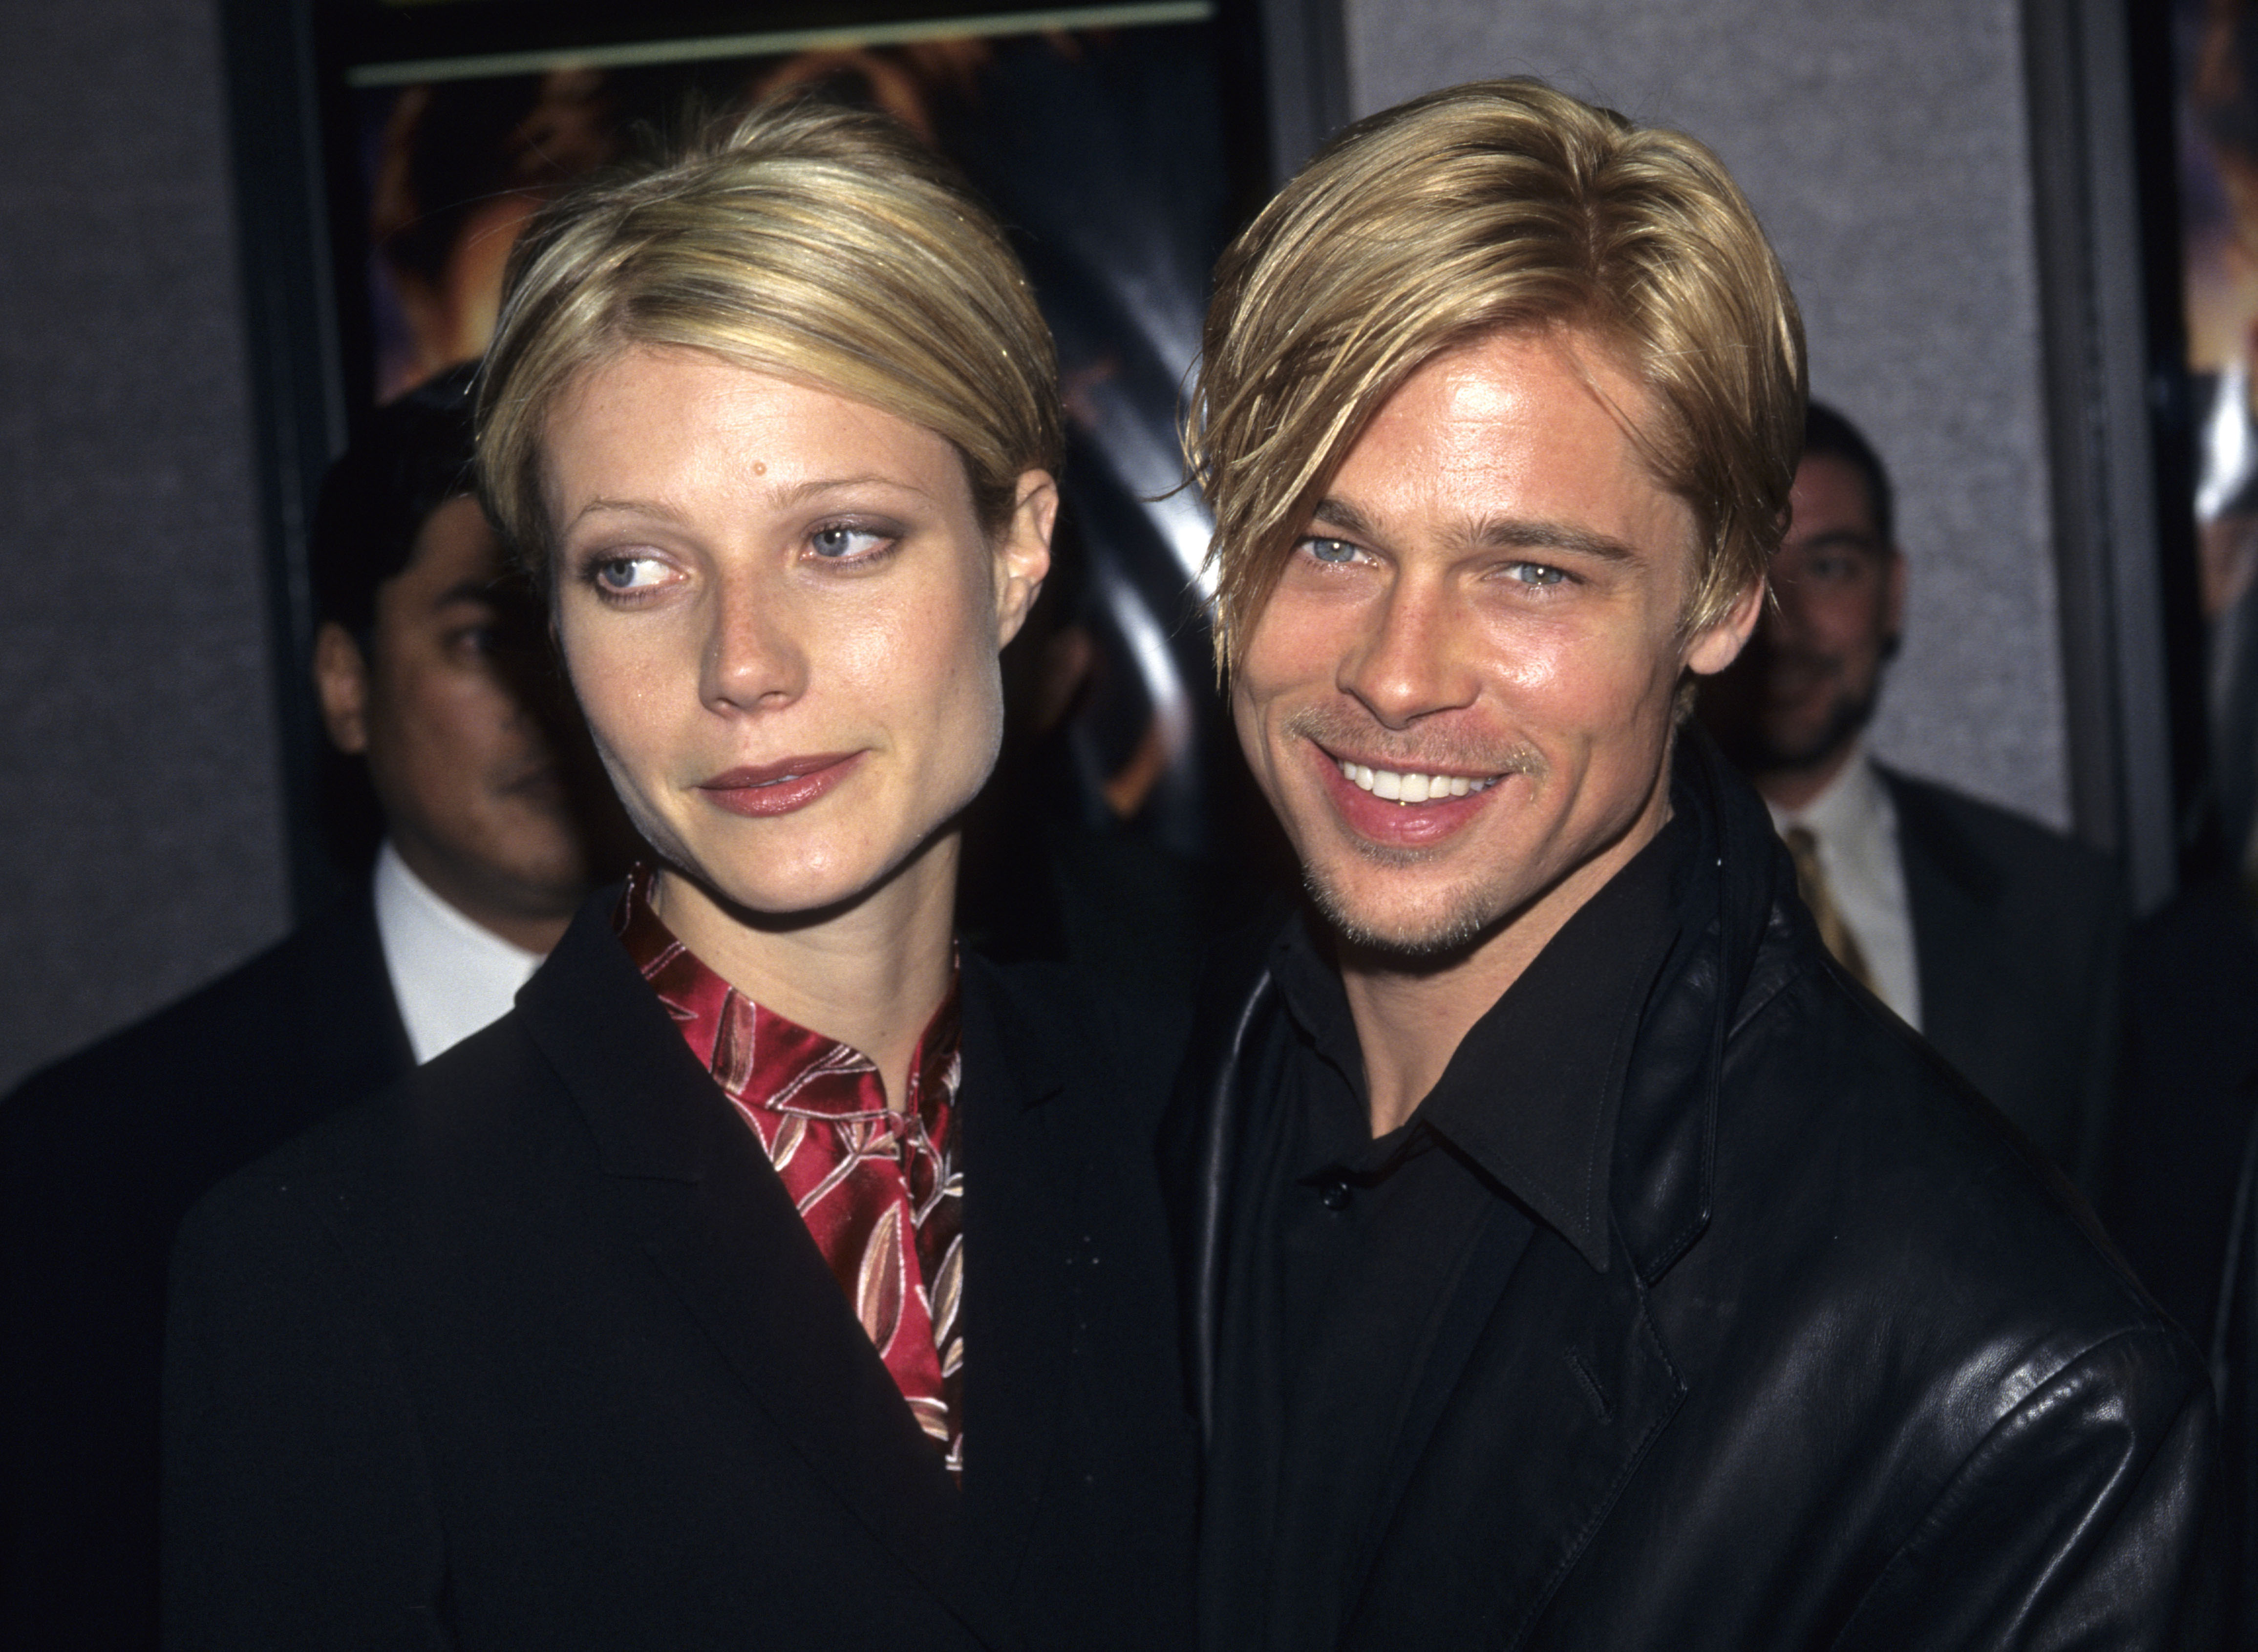 Gwyneth Paltrow and Brad Pitt at "The Devil's Own" premiere on March 13, 1997 | Source: Getty Images